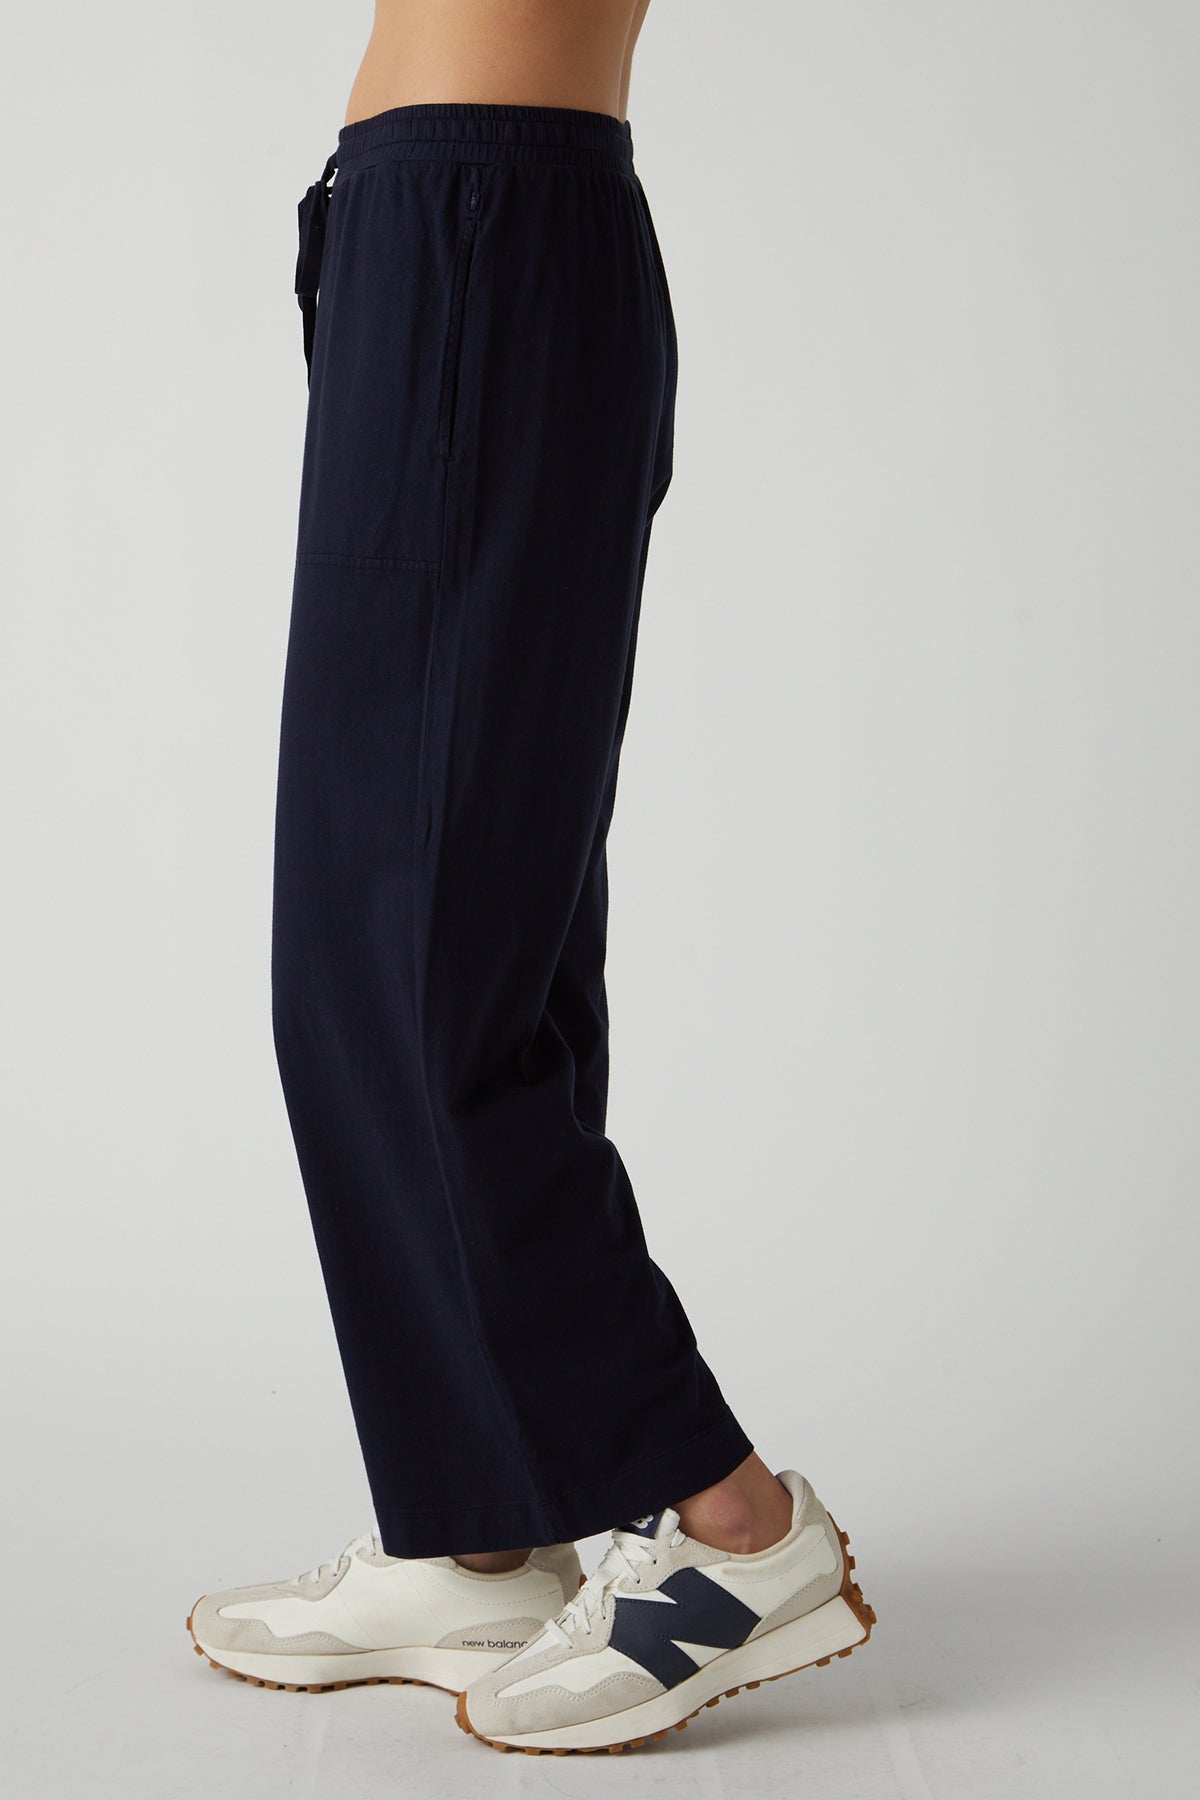   Pismo Pant in navy side 